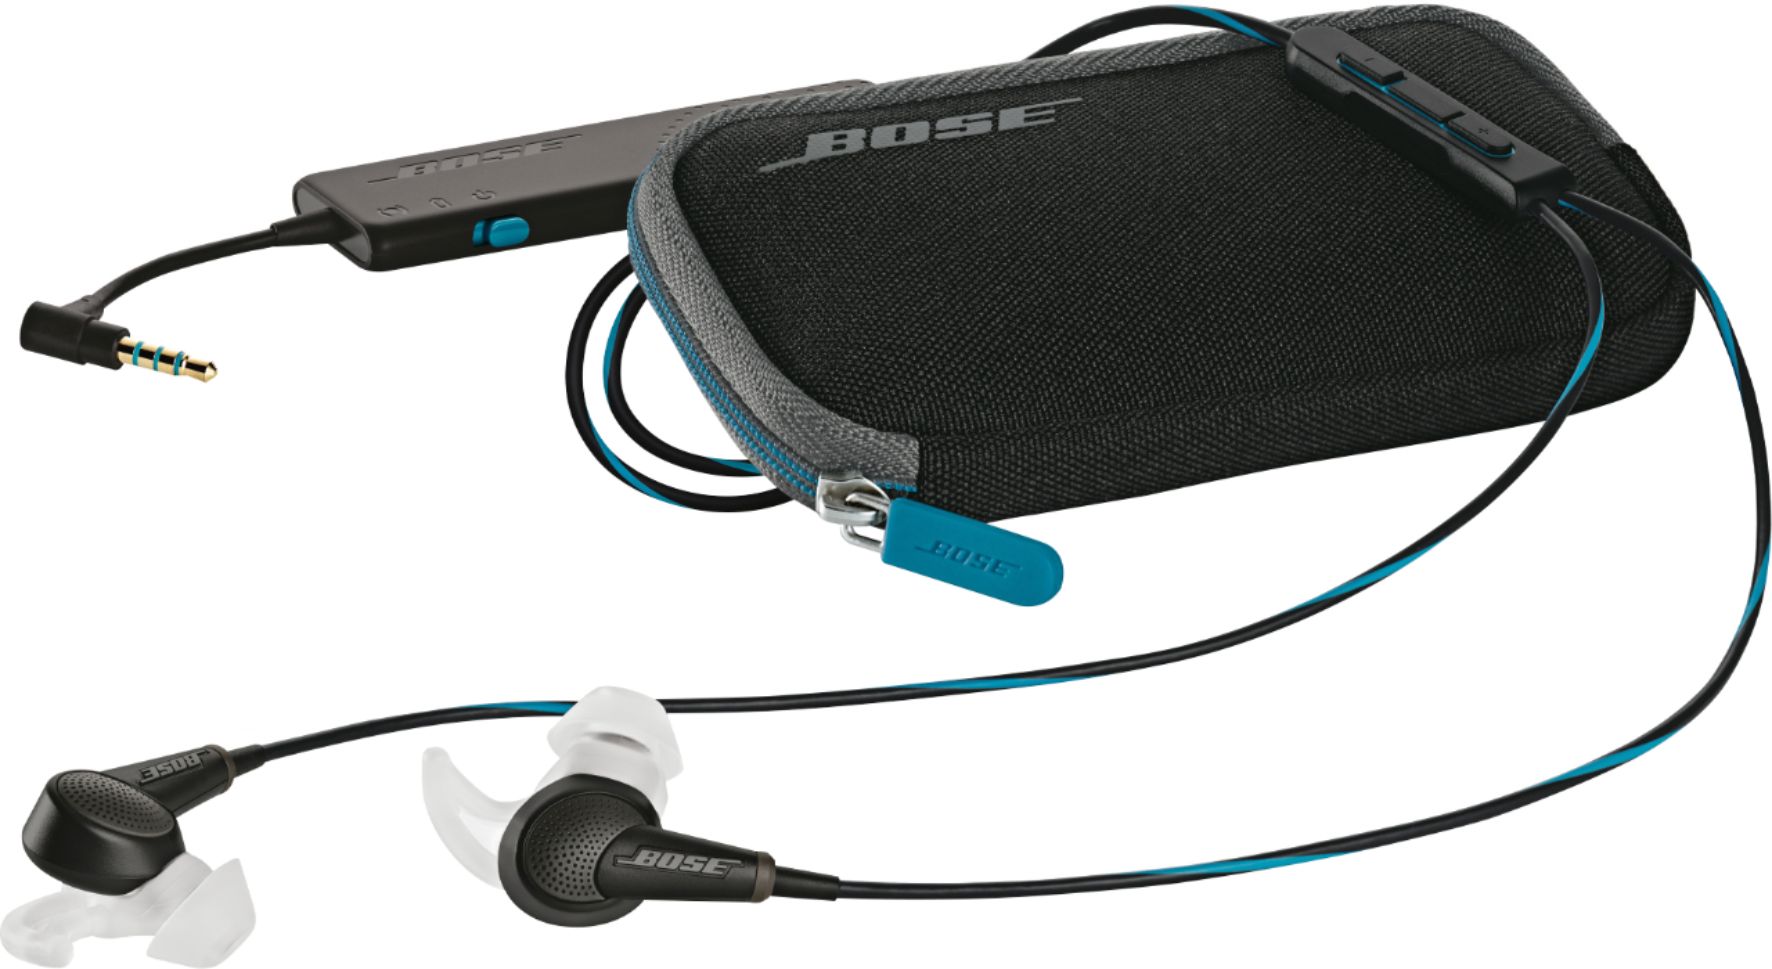 stum bryder daggry interview Best Buy: Bose QuietComfort 20 (iOS) Wired Noise Cancelling In-Ear Earbuds  Black 718839-0010